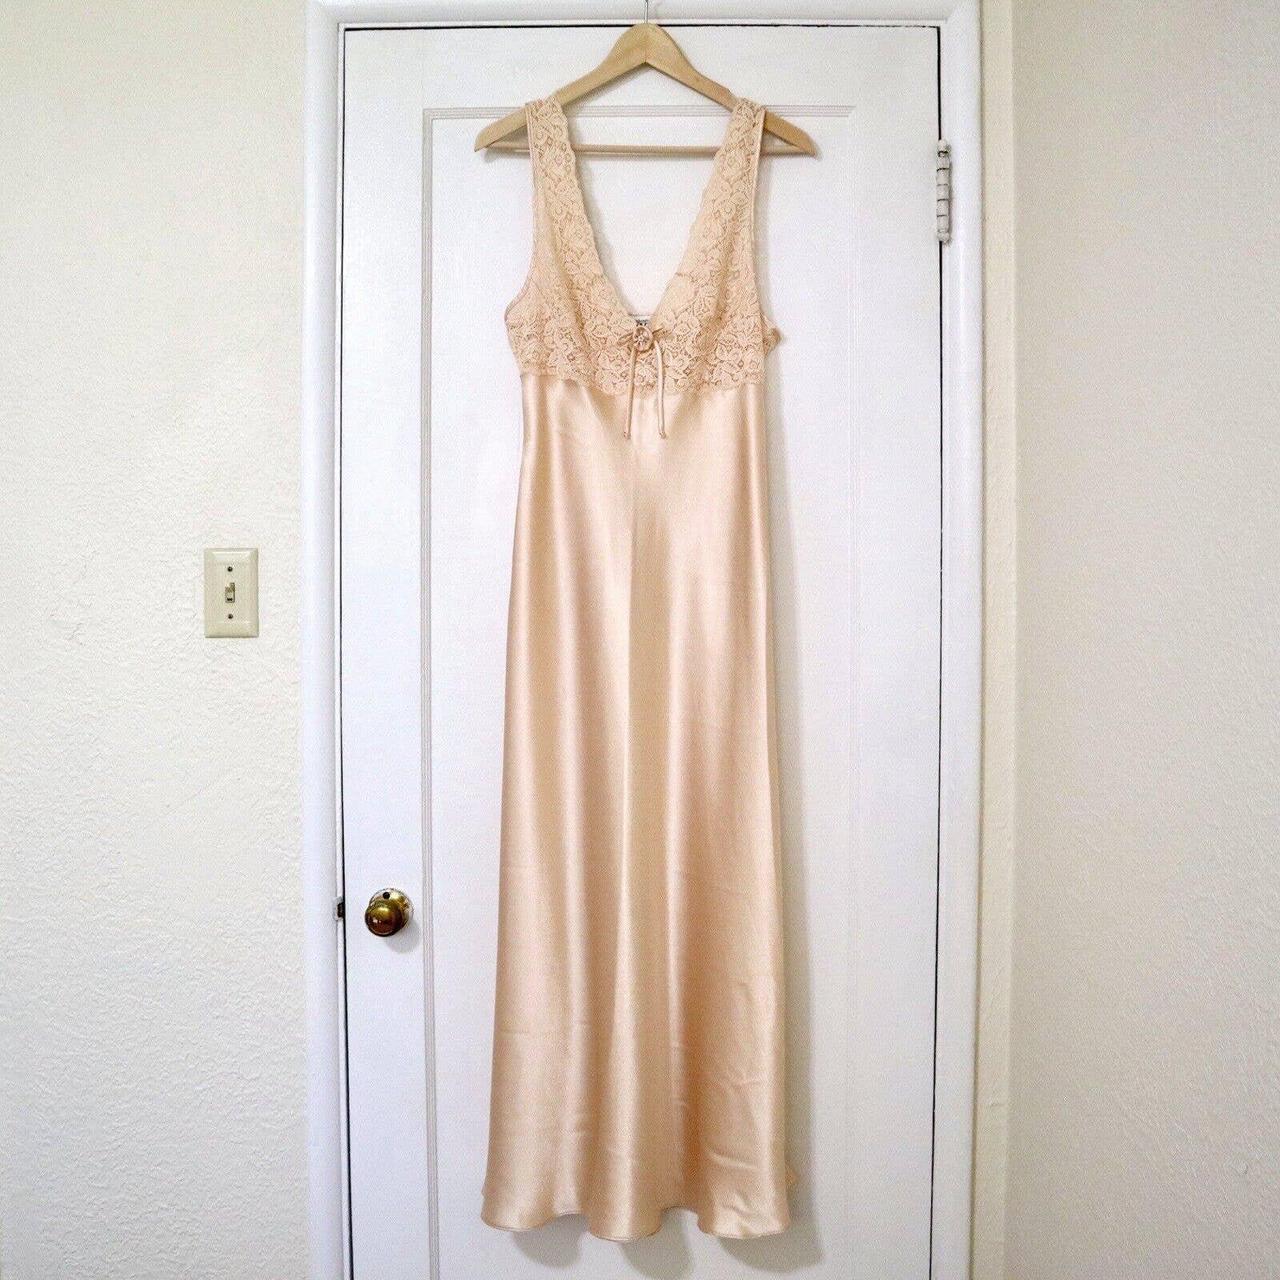 item listed by thriftinlindsey